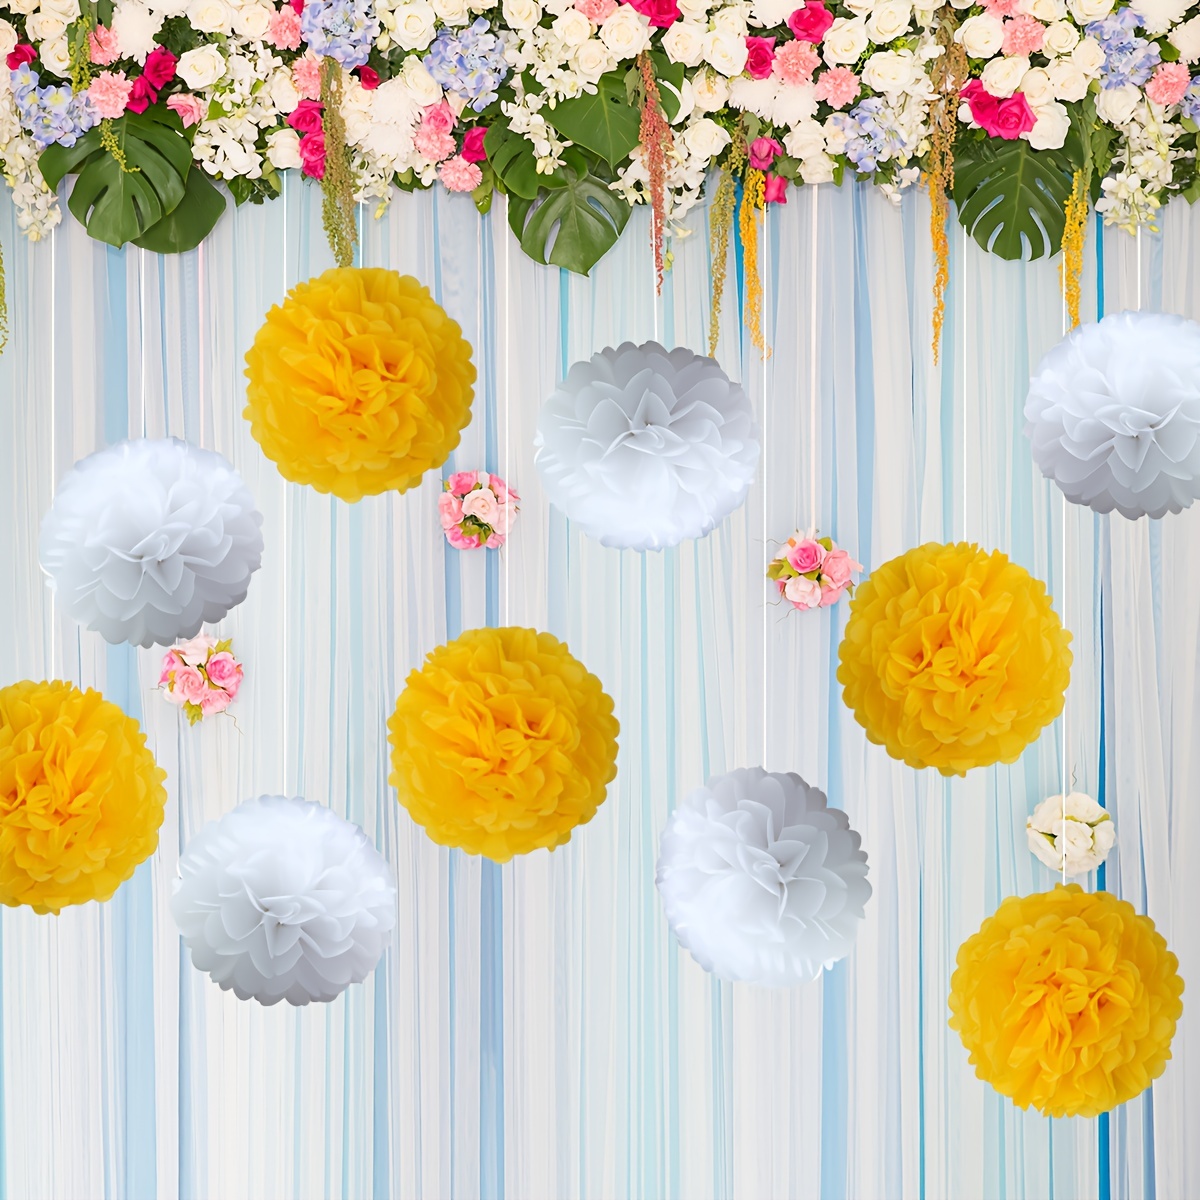 10pcs/lot 6inch/15cm gold and silver Tissue Paper Pom Poms DIY Flower Balls  Wedding Party Supplies Decoration - AliExpress